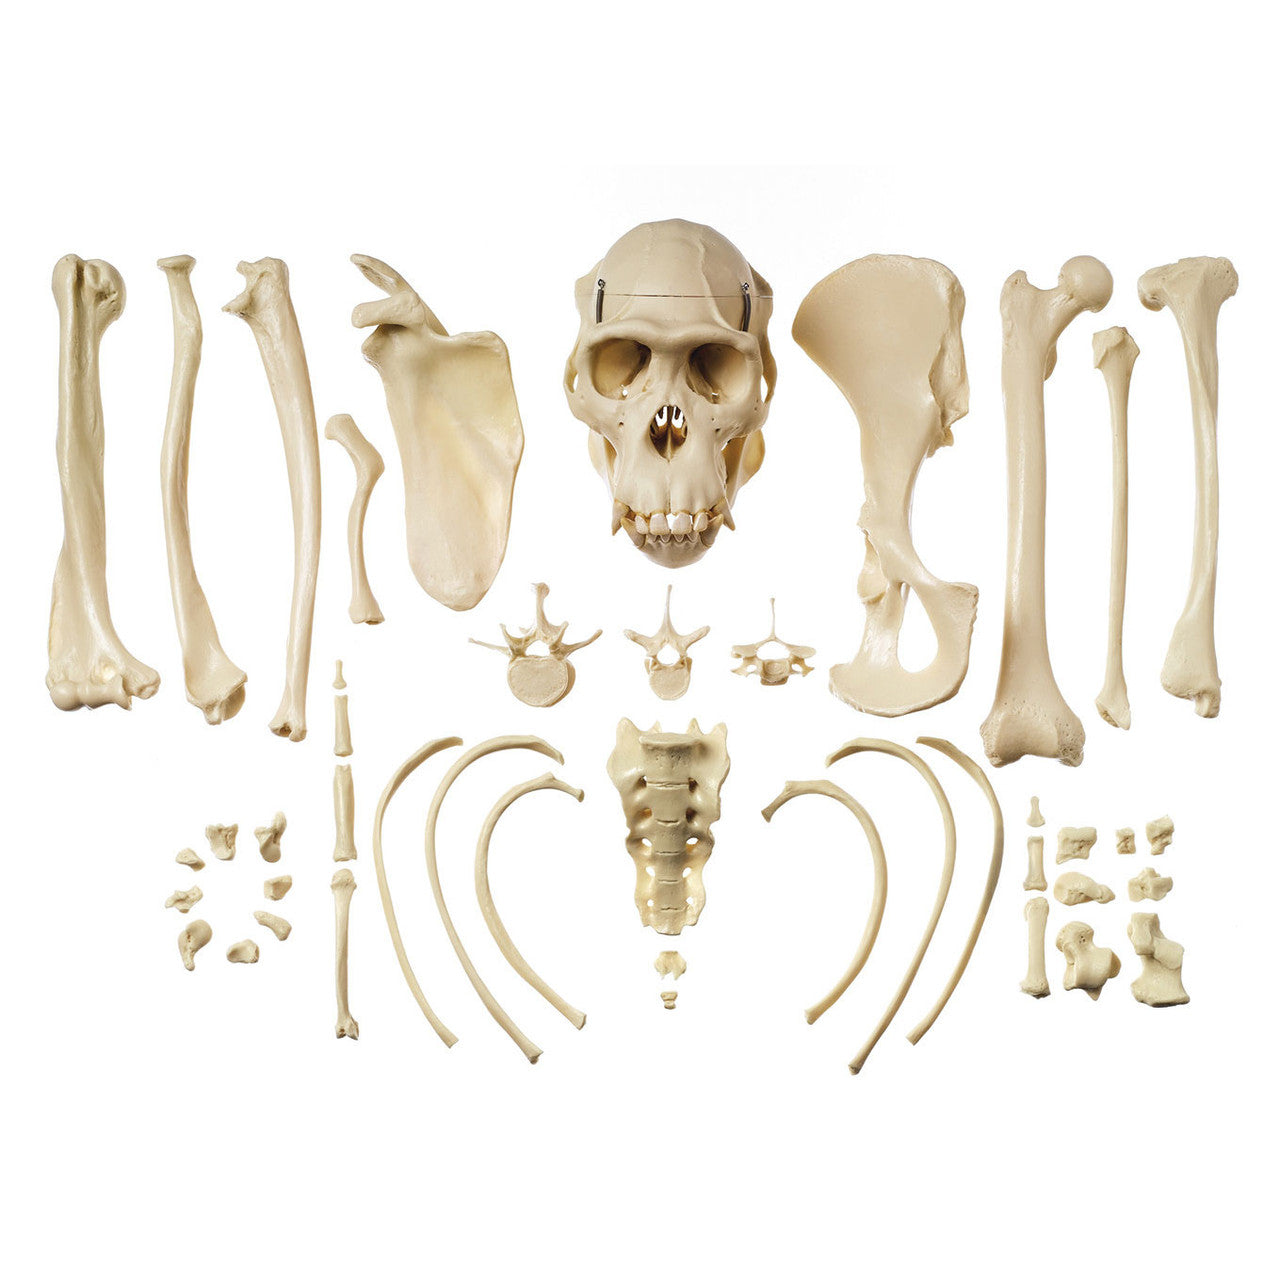 Collection of Typical Chimpanzee Bones Somso ZoS 53/142